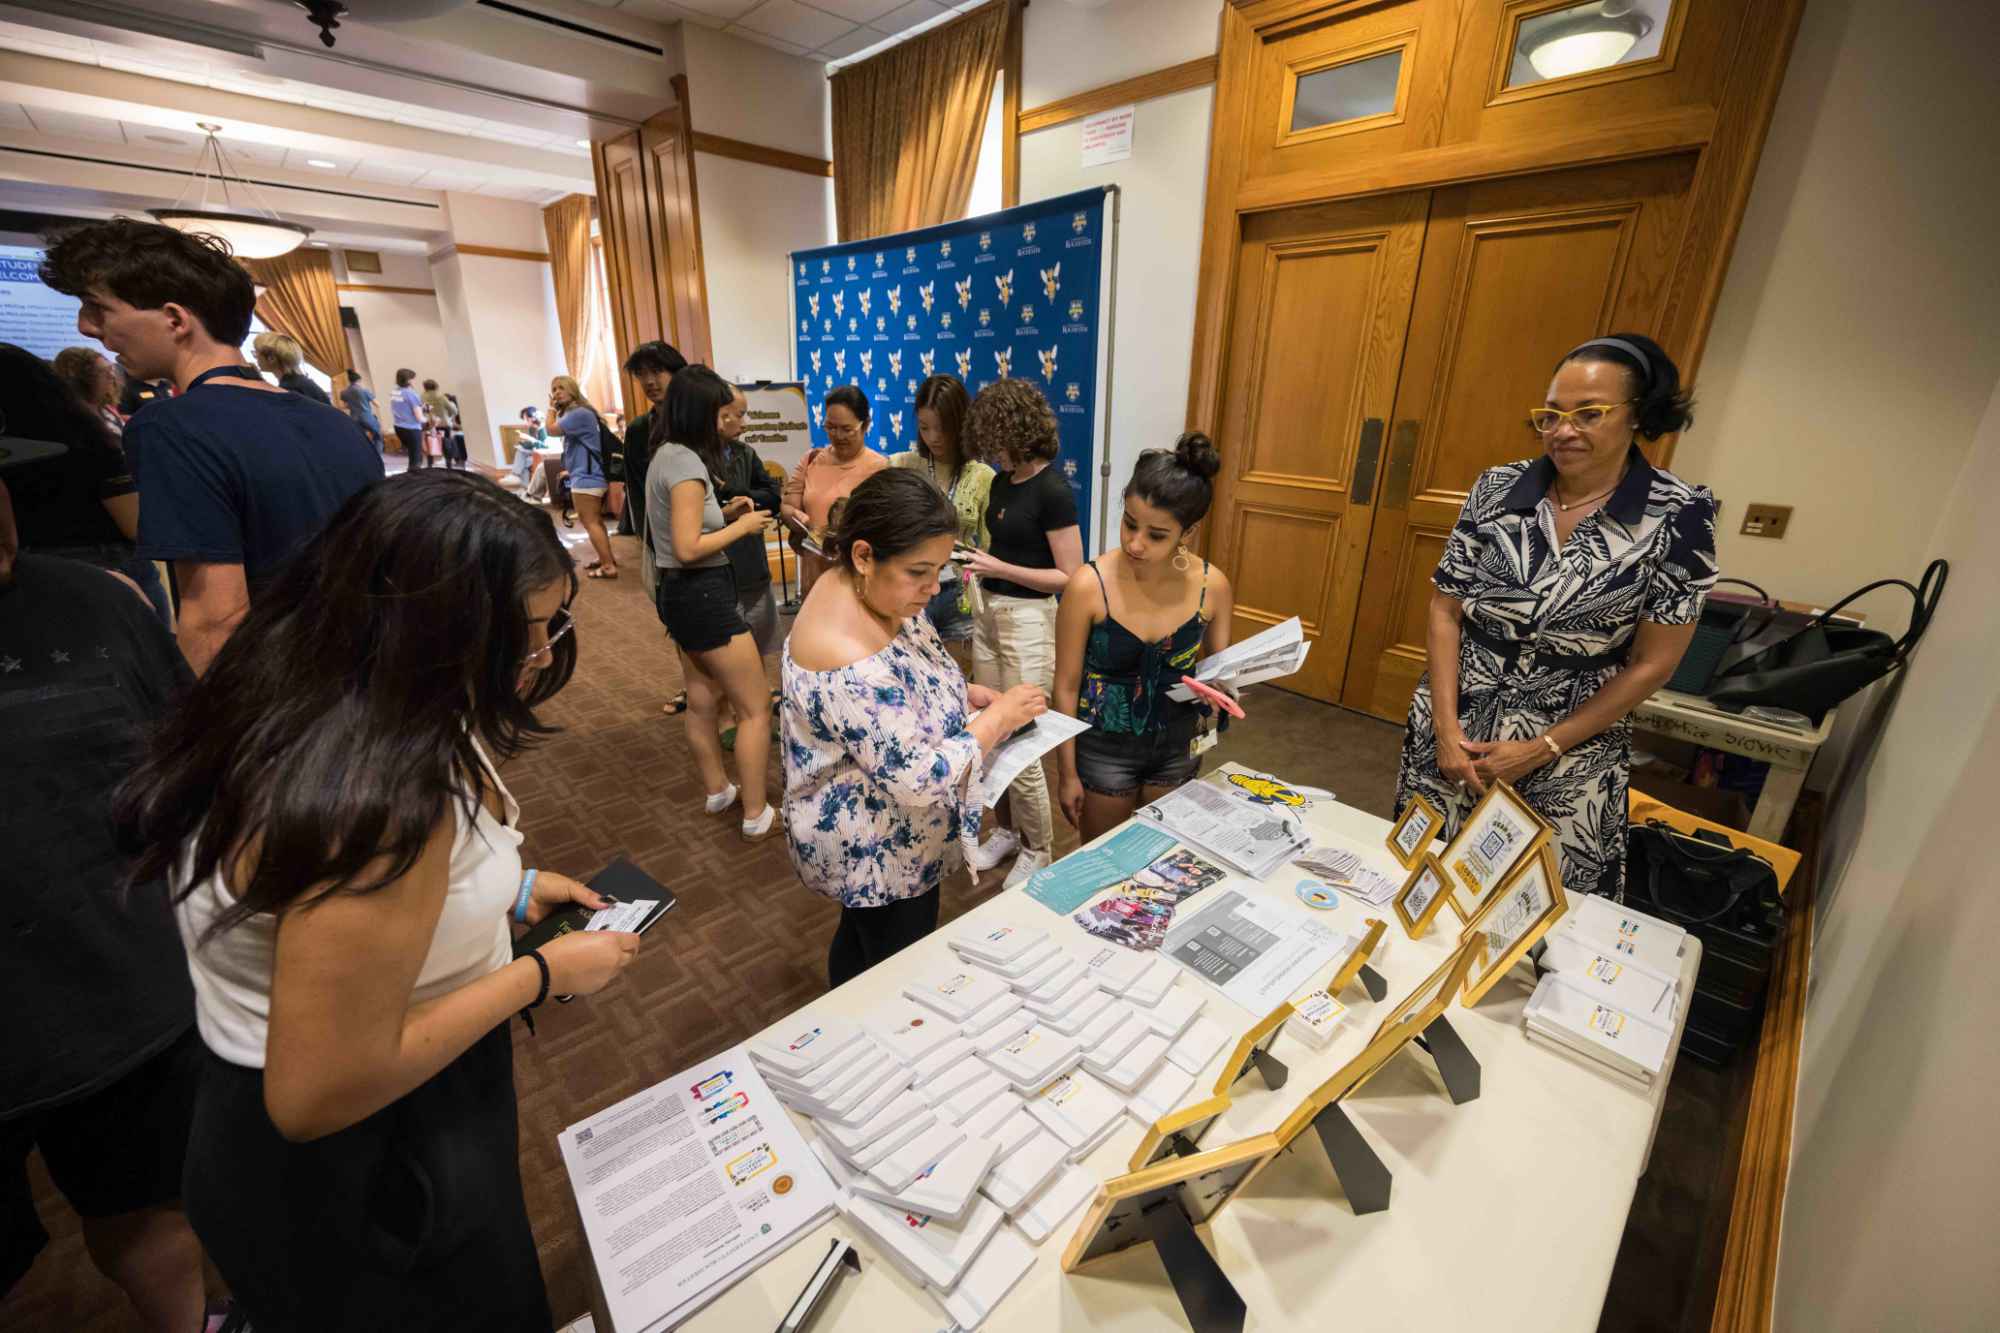 First generation students and their families peruse resources and materials on display during an on-campus reception for them.